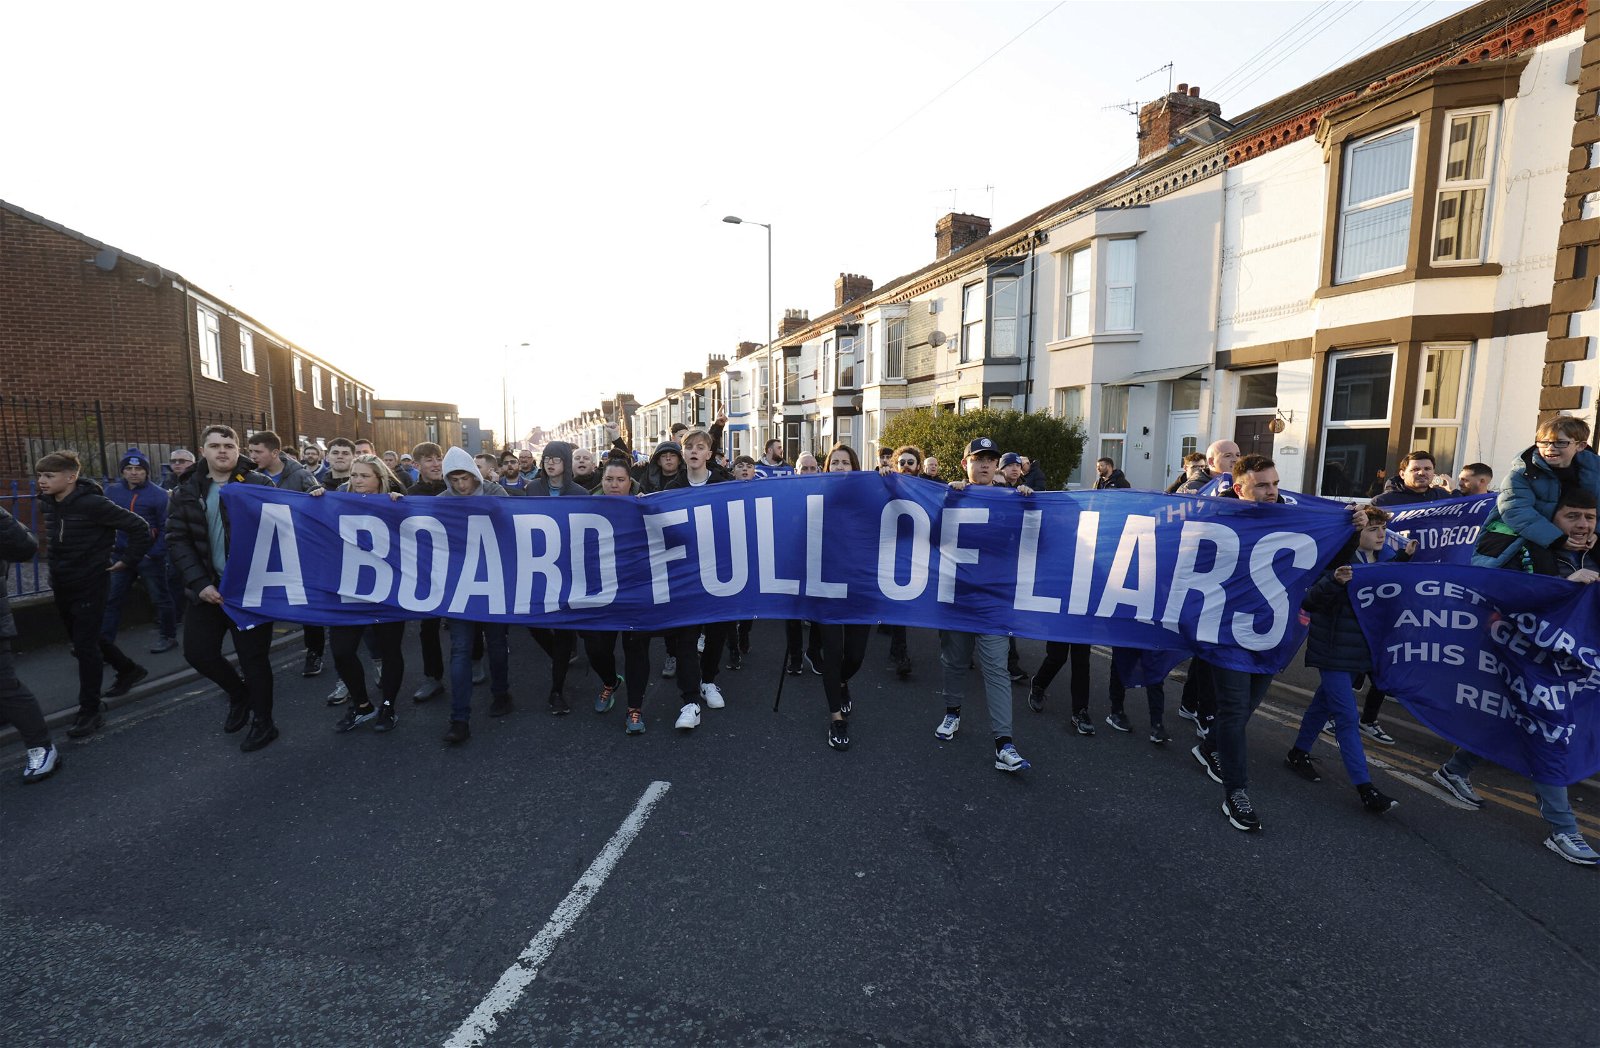 Everton fans display a banner in protest against the ownership of the club outside the stadium before the match